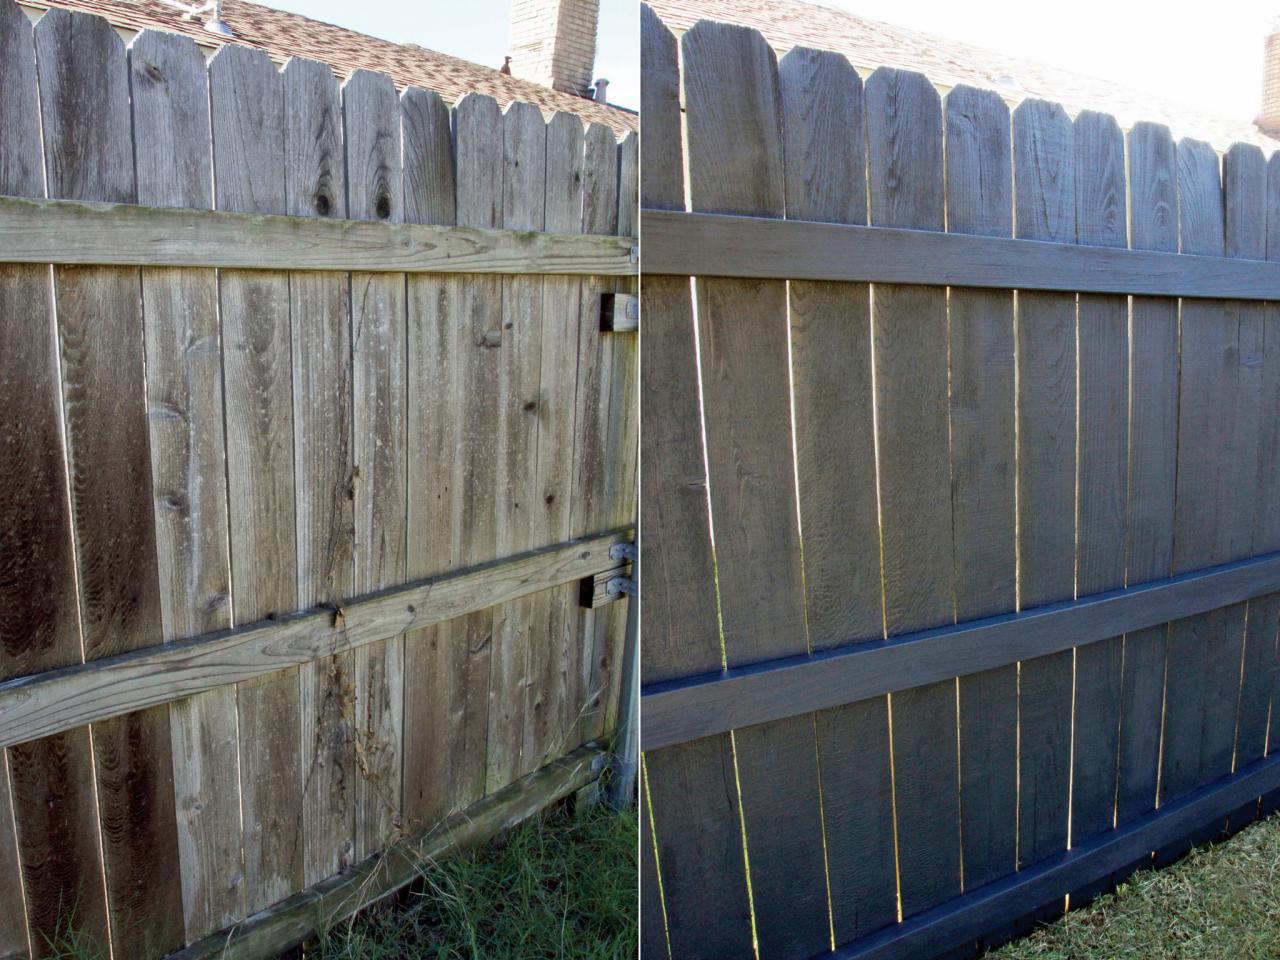 How To Repaint A Fence Wood Fence Painting and Staining Instructions and Tips | HGTV